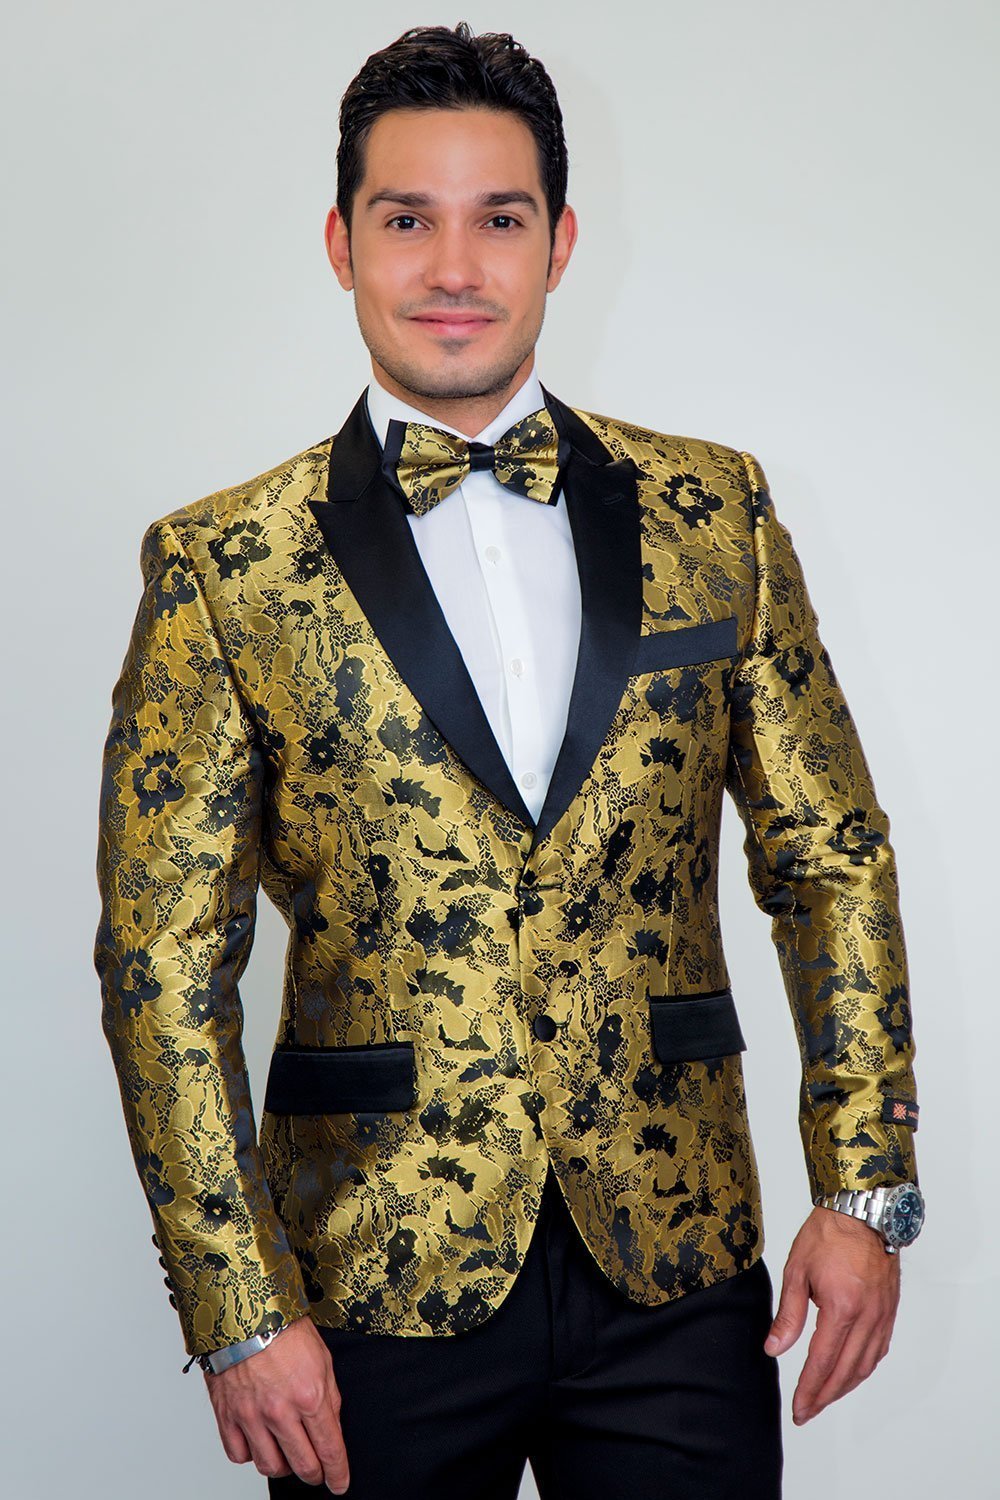 2022 New Designs Formal Men Suits For Wedding Black Gold Printed Floral  Jacket Pants Slim Fit 2 Pieces Groom Wear Party Tuxedos  AliExpress